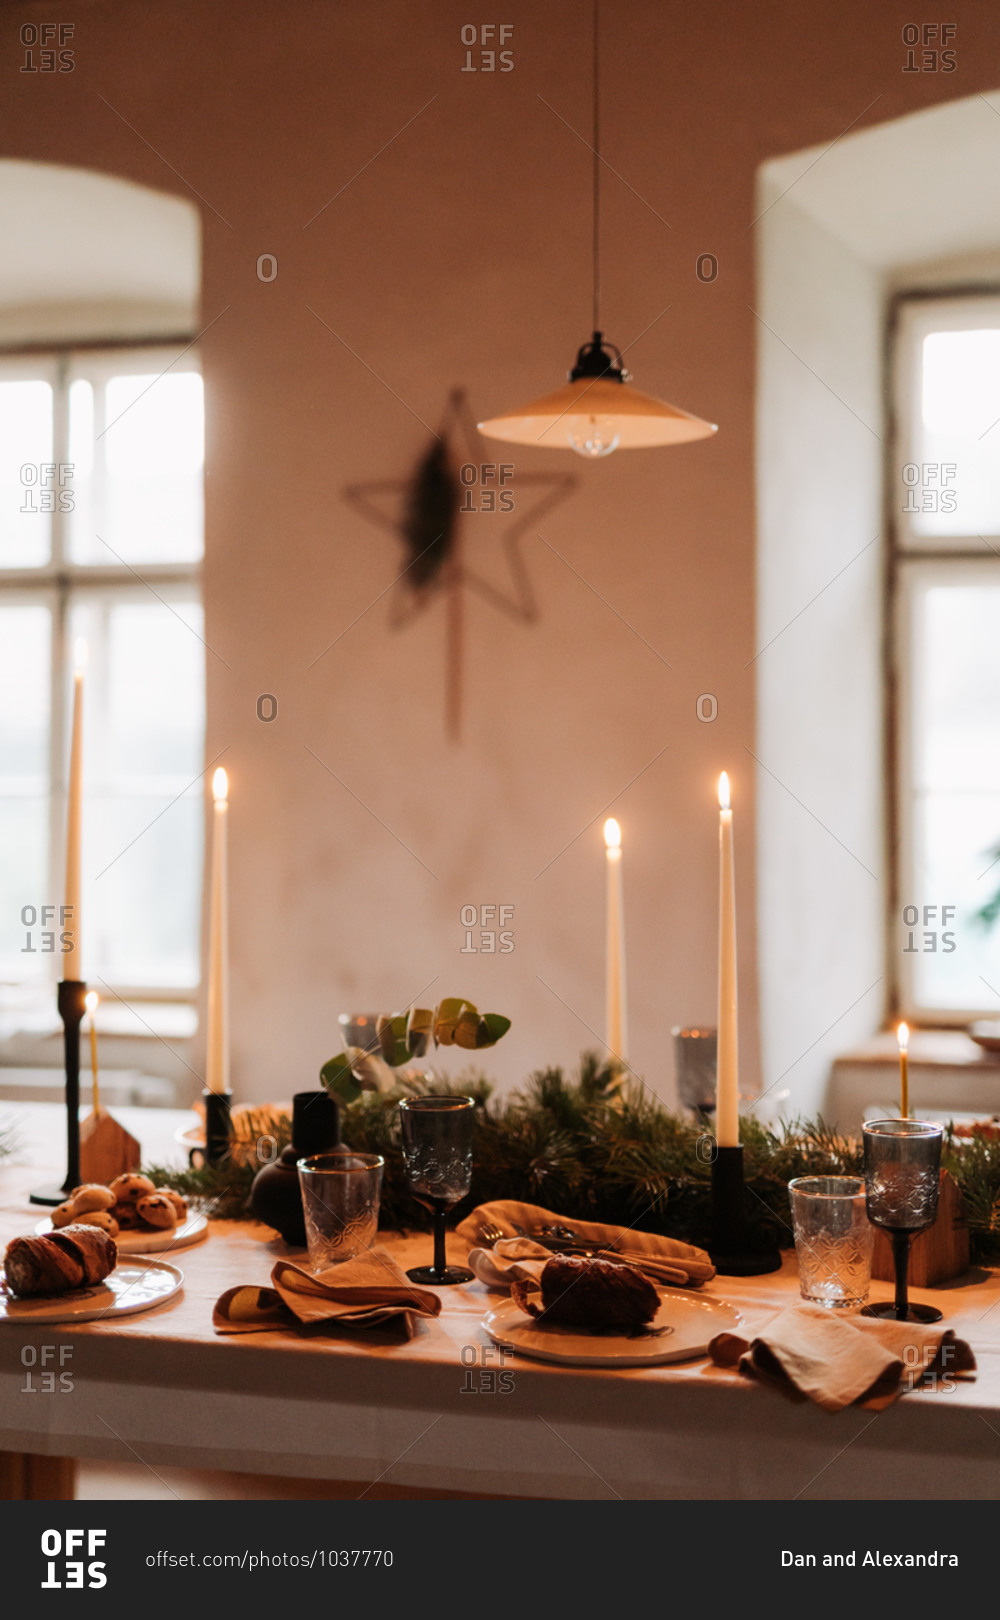 Christmas dinner gathering table with baked goods and lit candlesticks